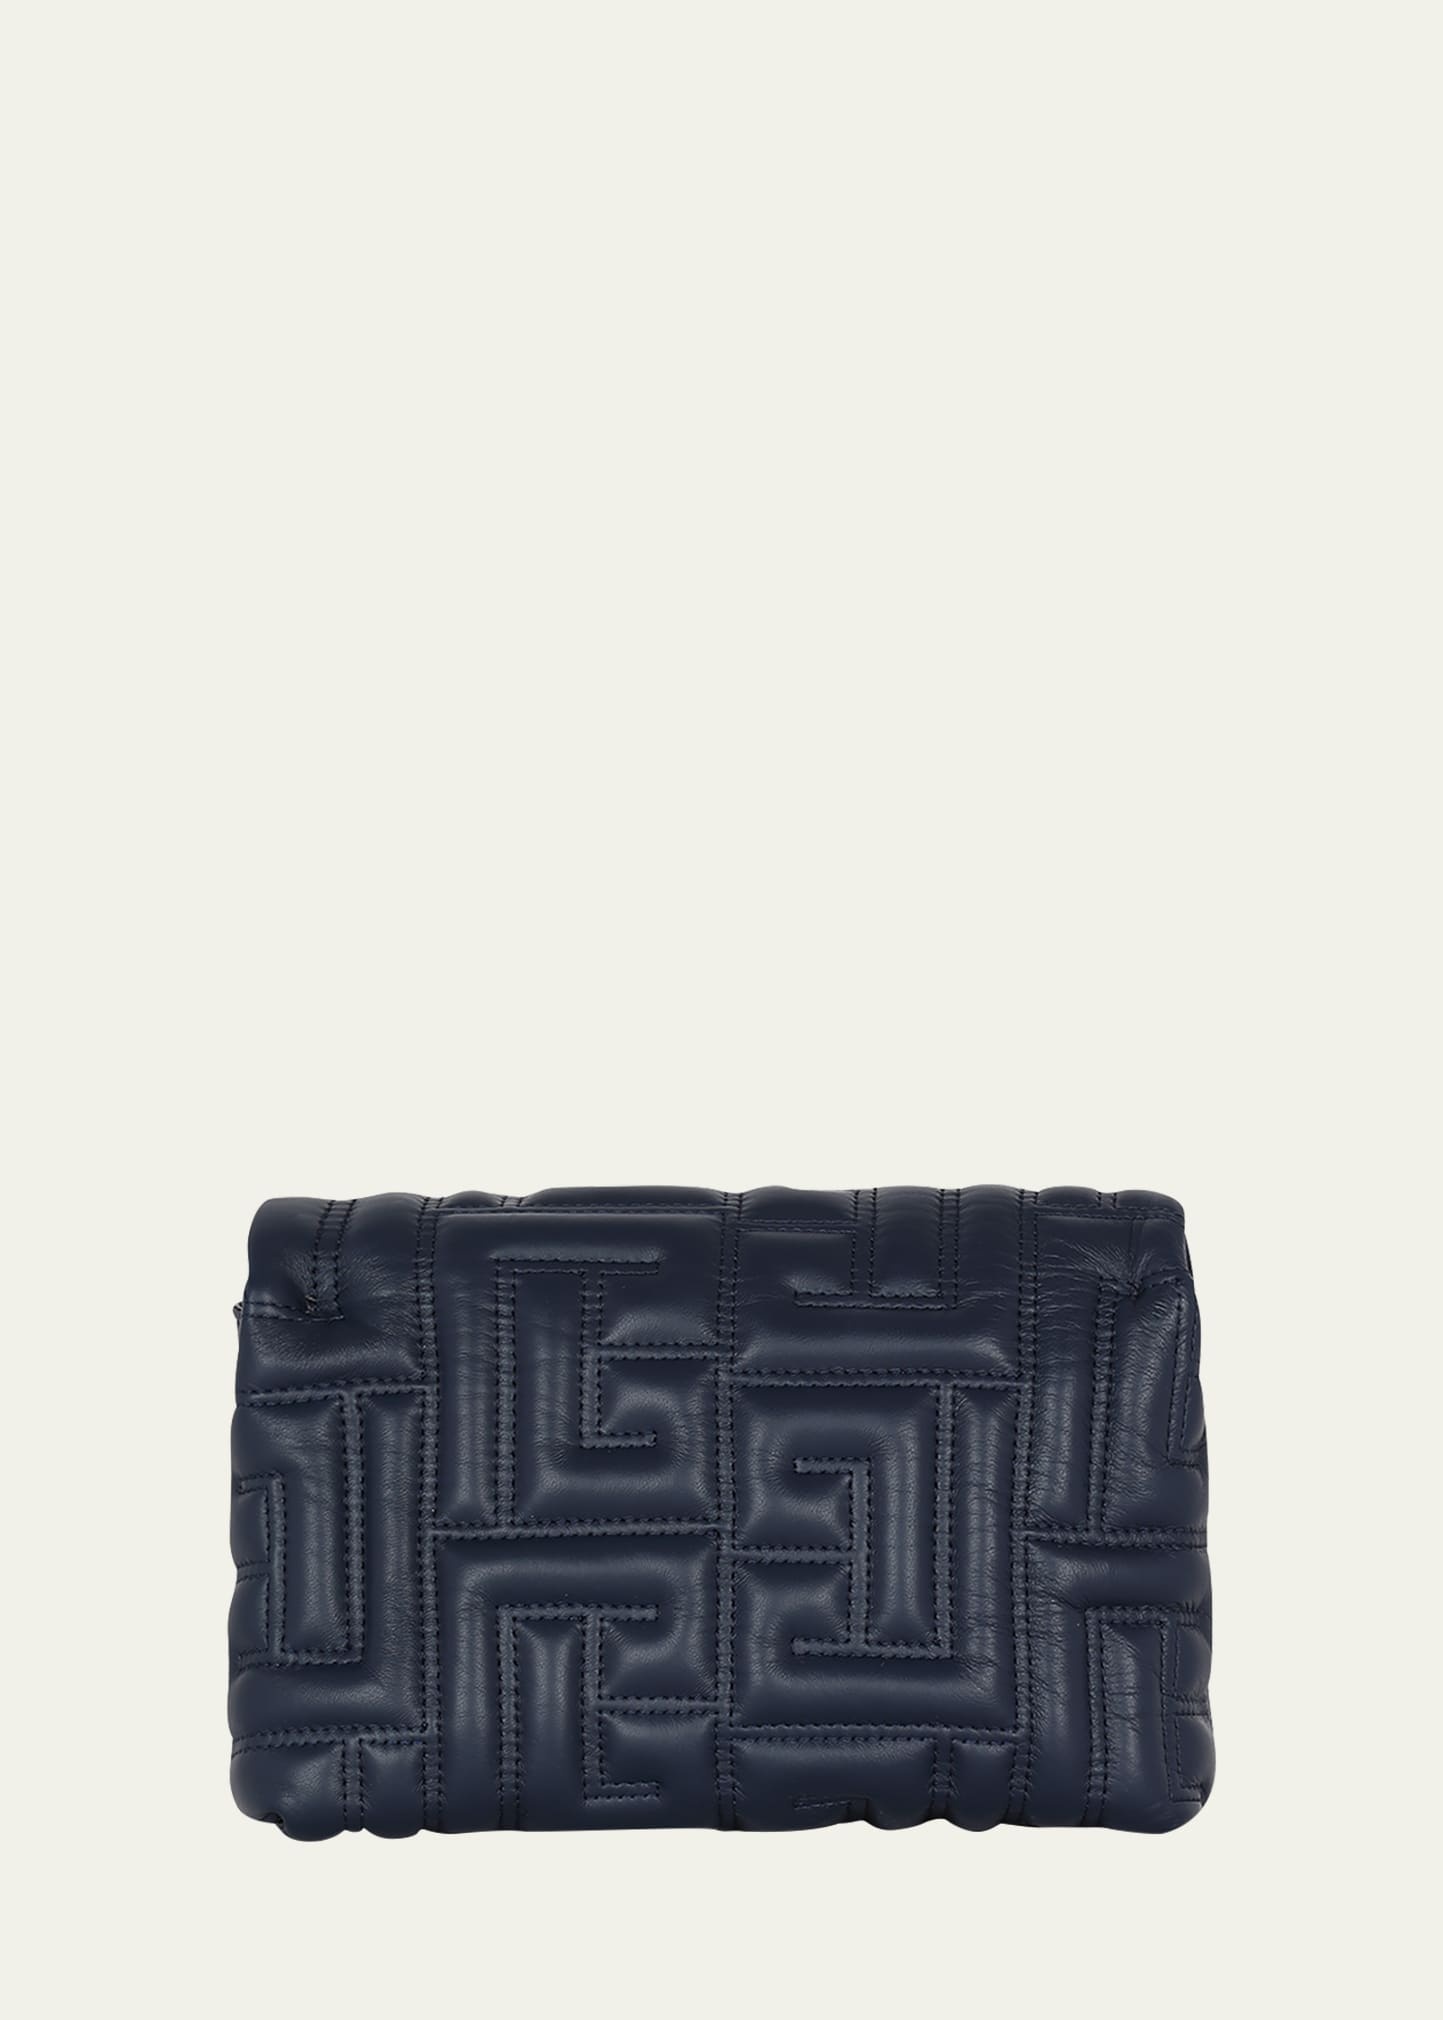 1945 Mini Quilted Leather Clutch Bag - 3